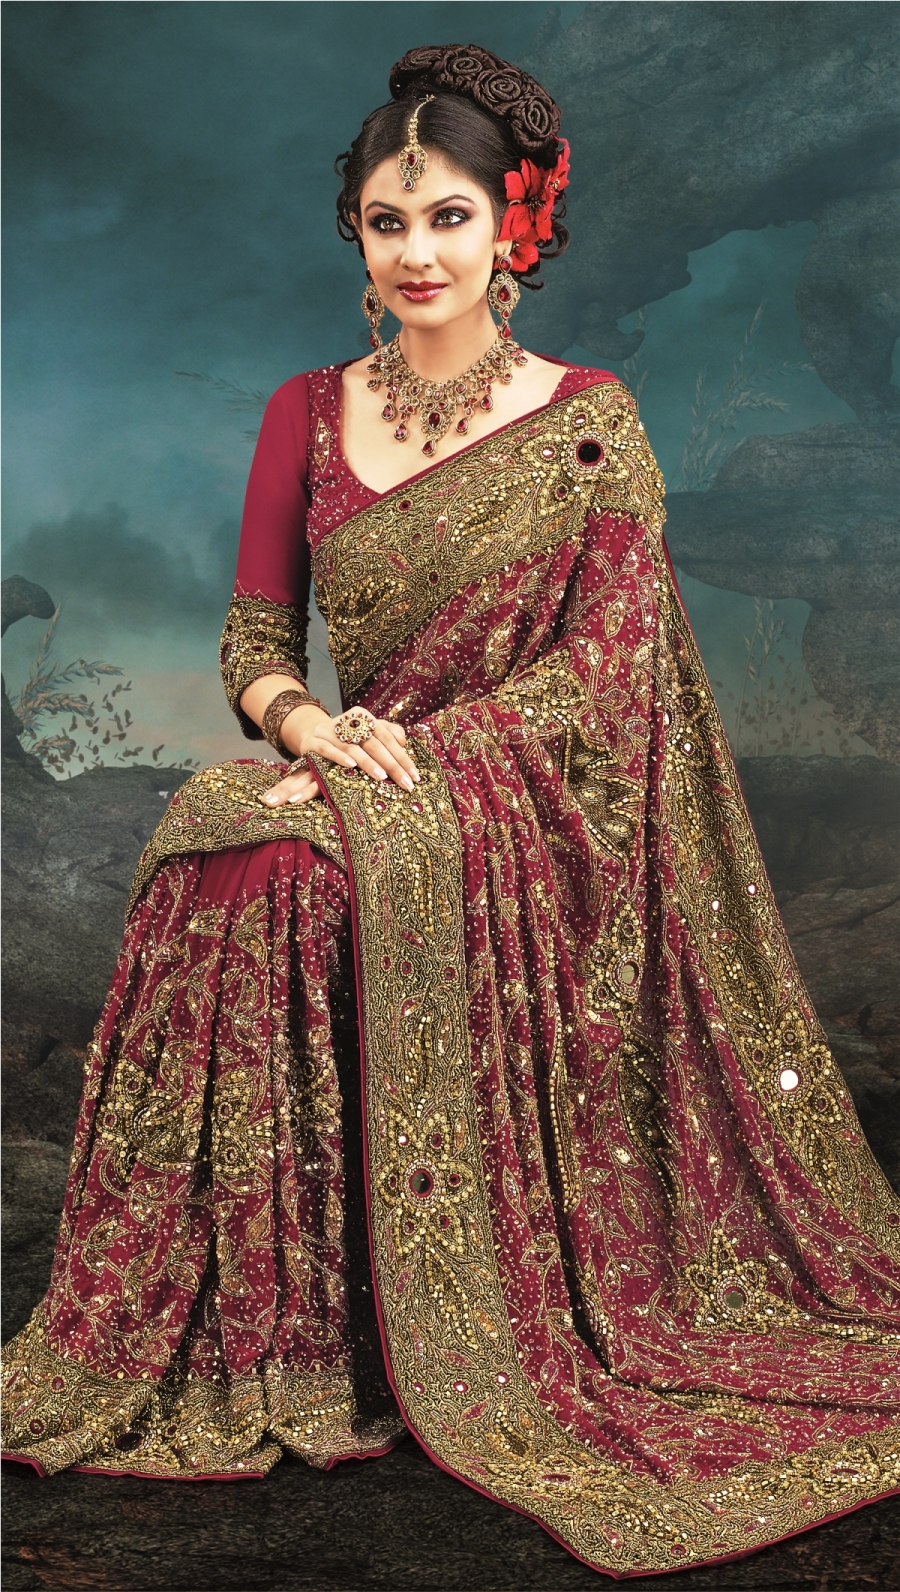 Amazing One Piece Indian Wedding Dress of the decade Check it out now 